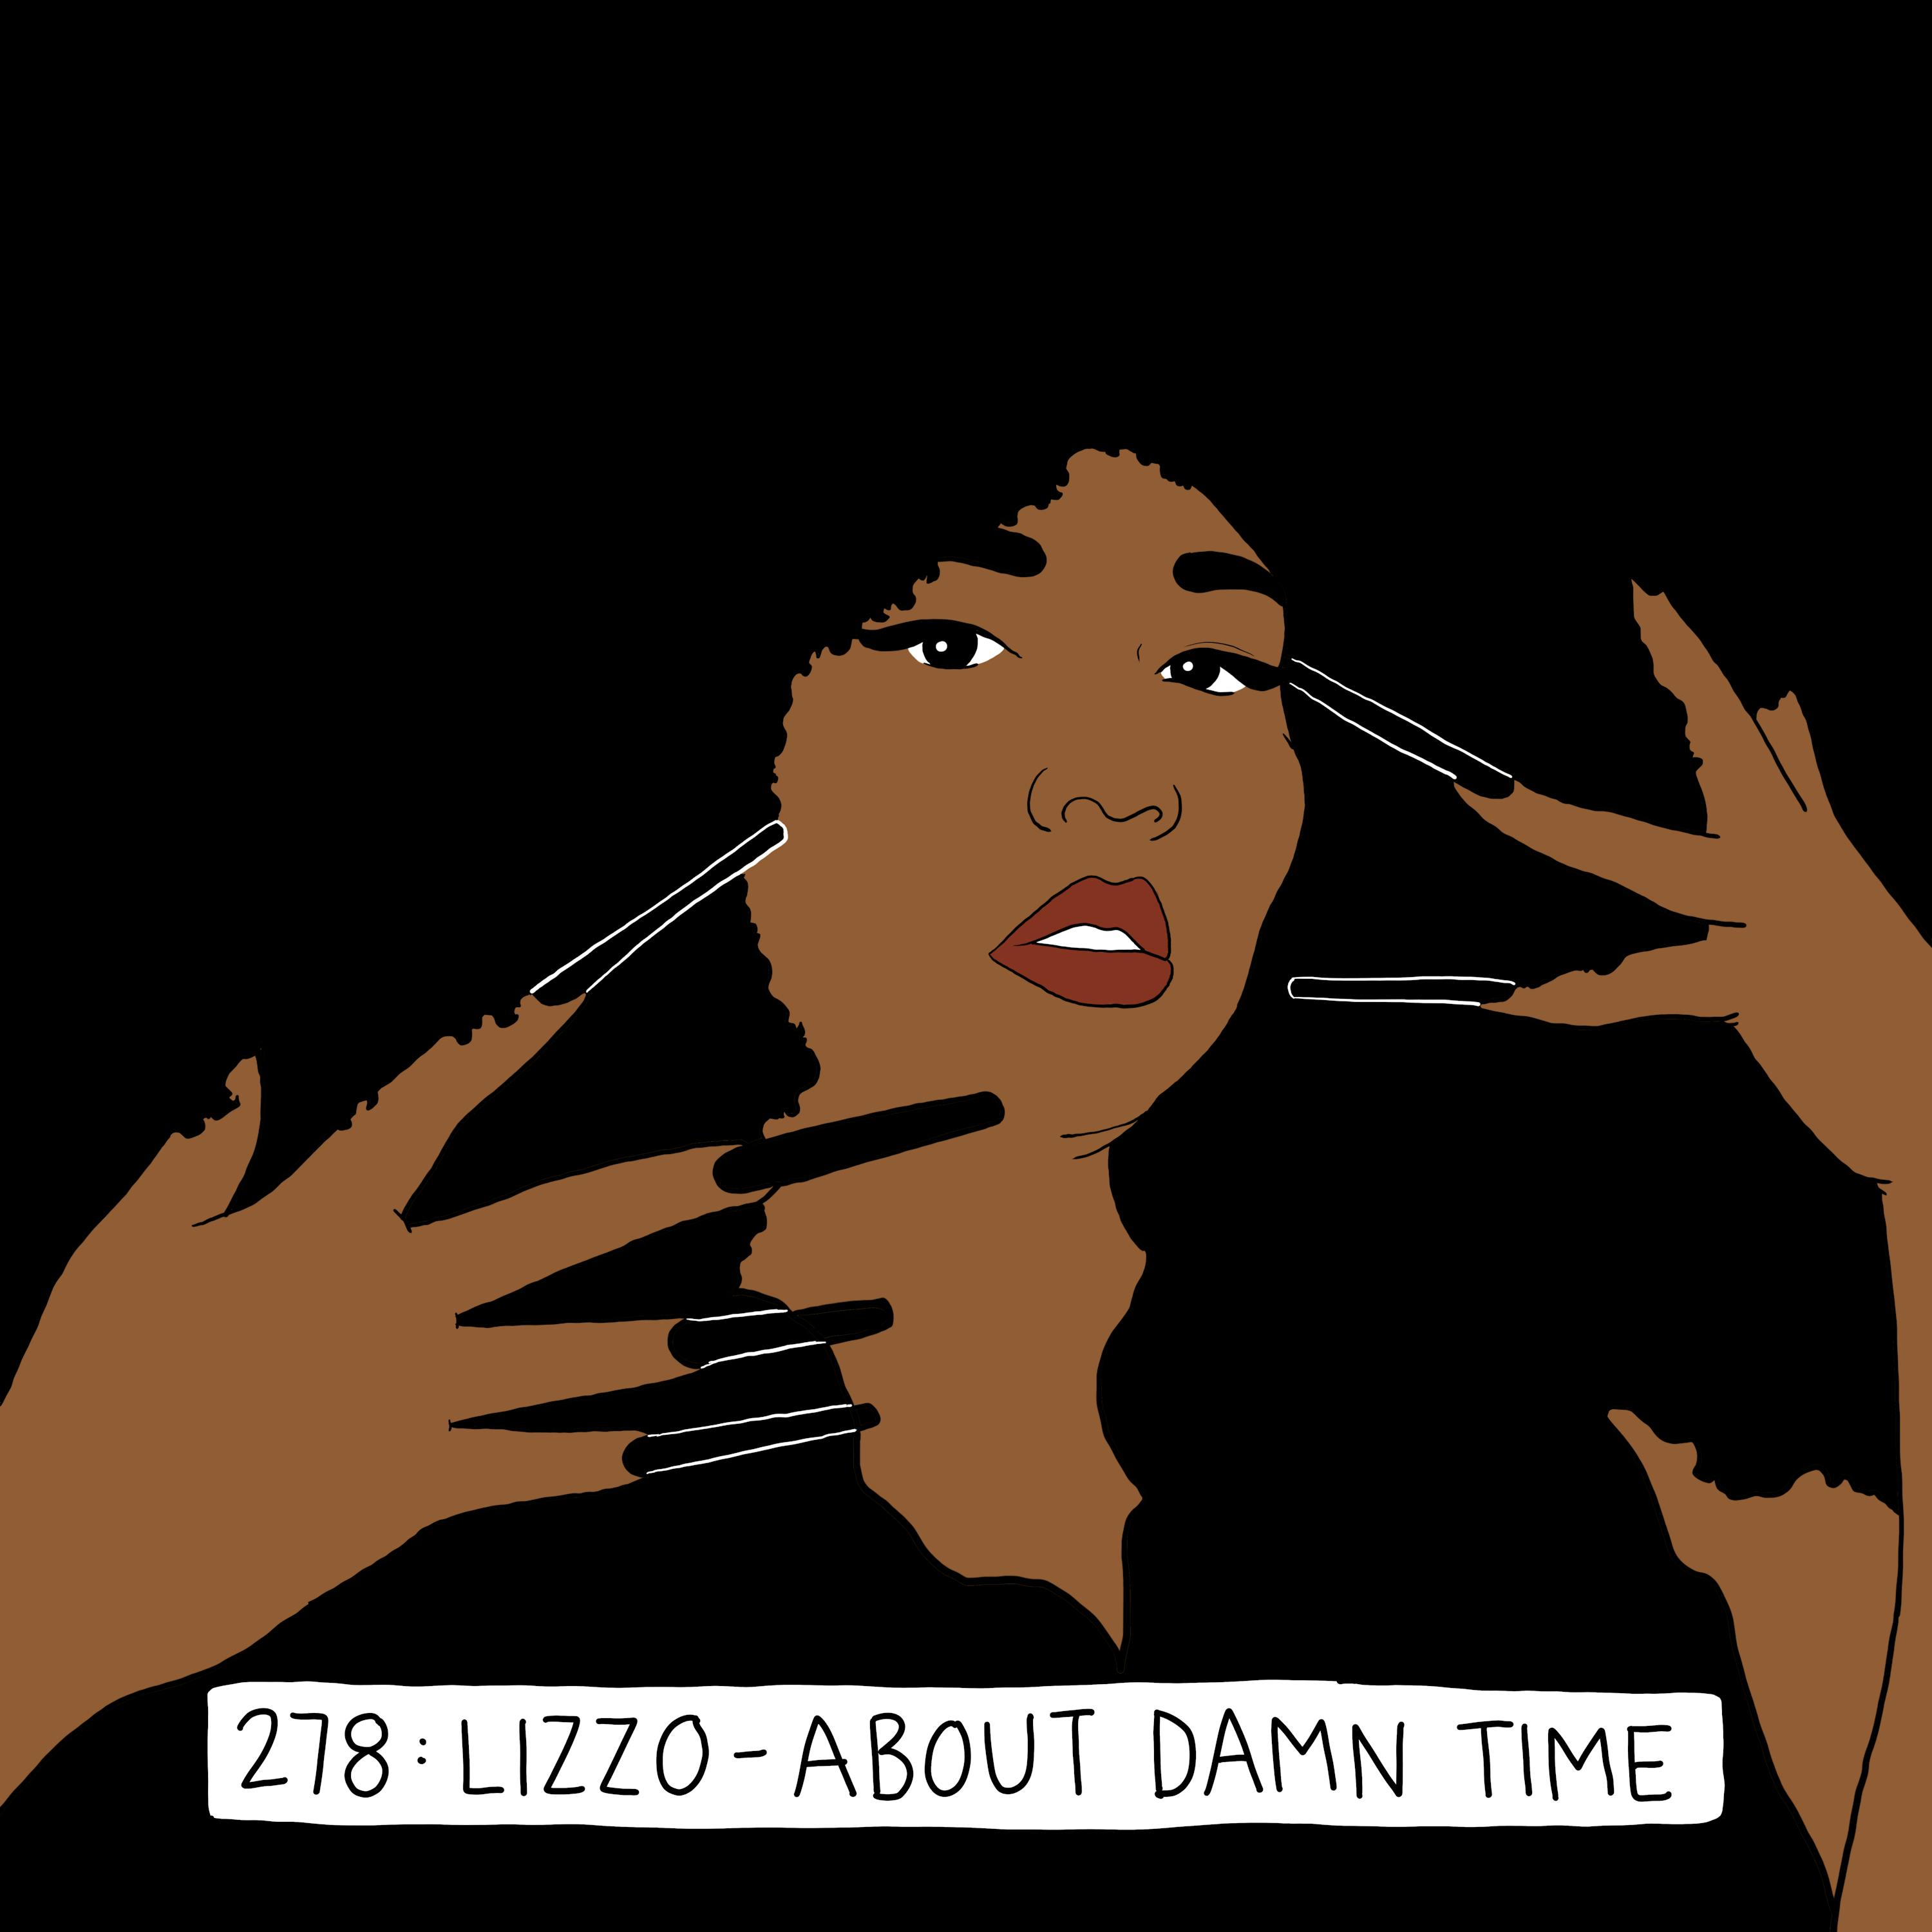 "It's About Damn Time" for Another Lizzo #1